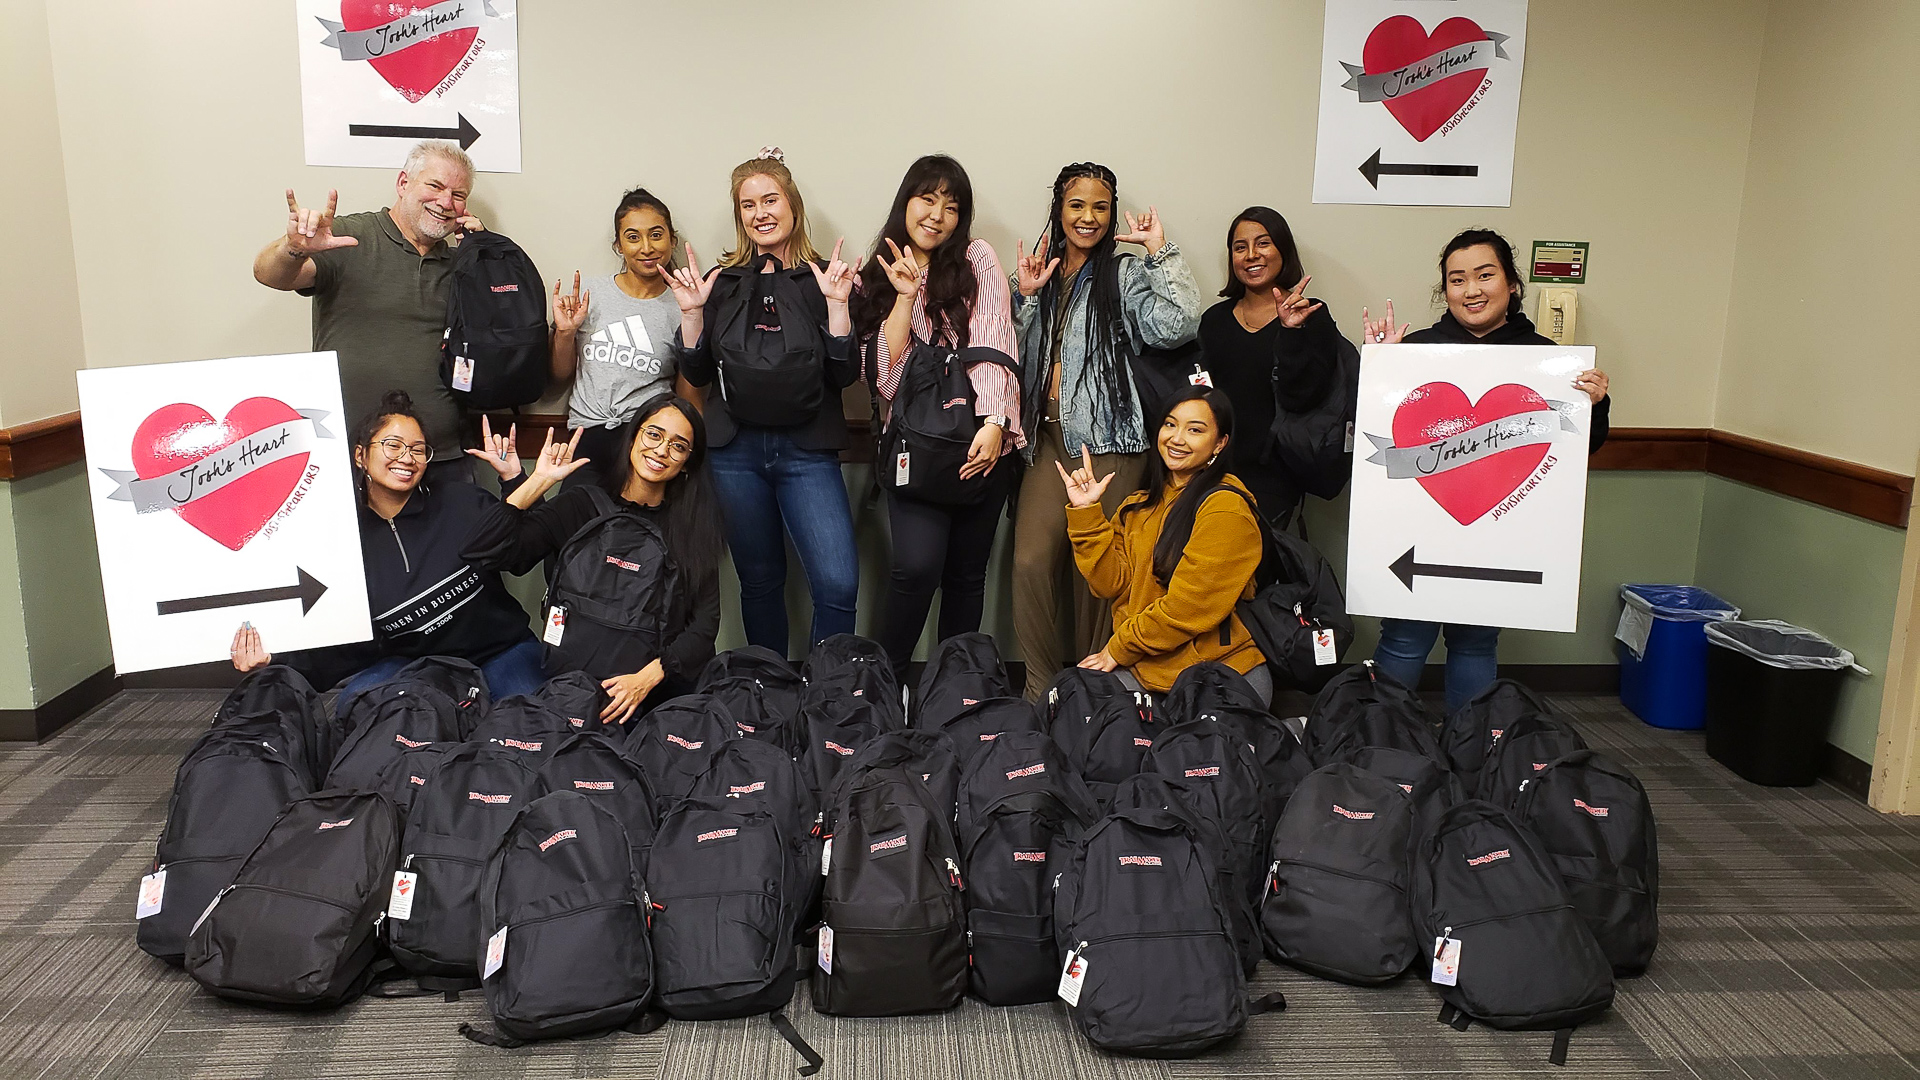 Josh's Heart volunteers pose with backpacks and signs with the organization's logo.